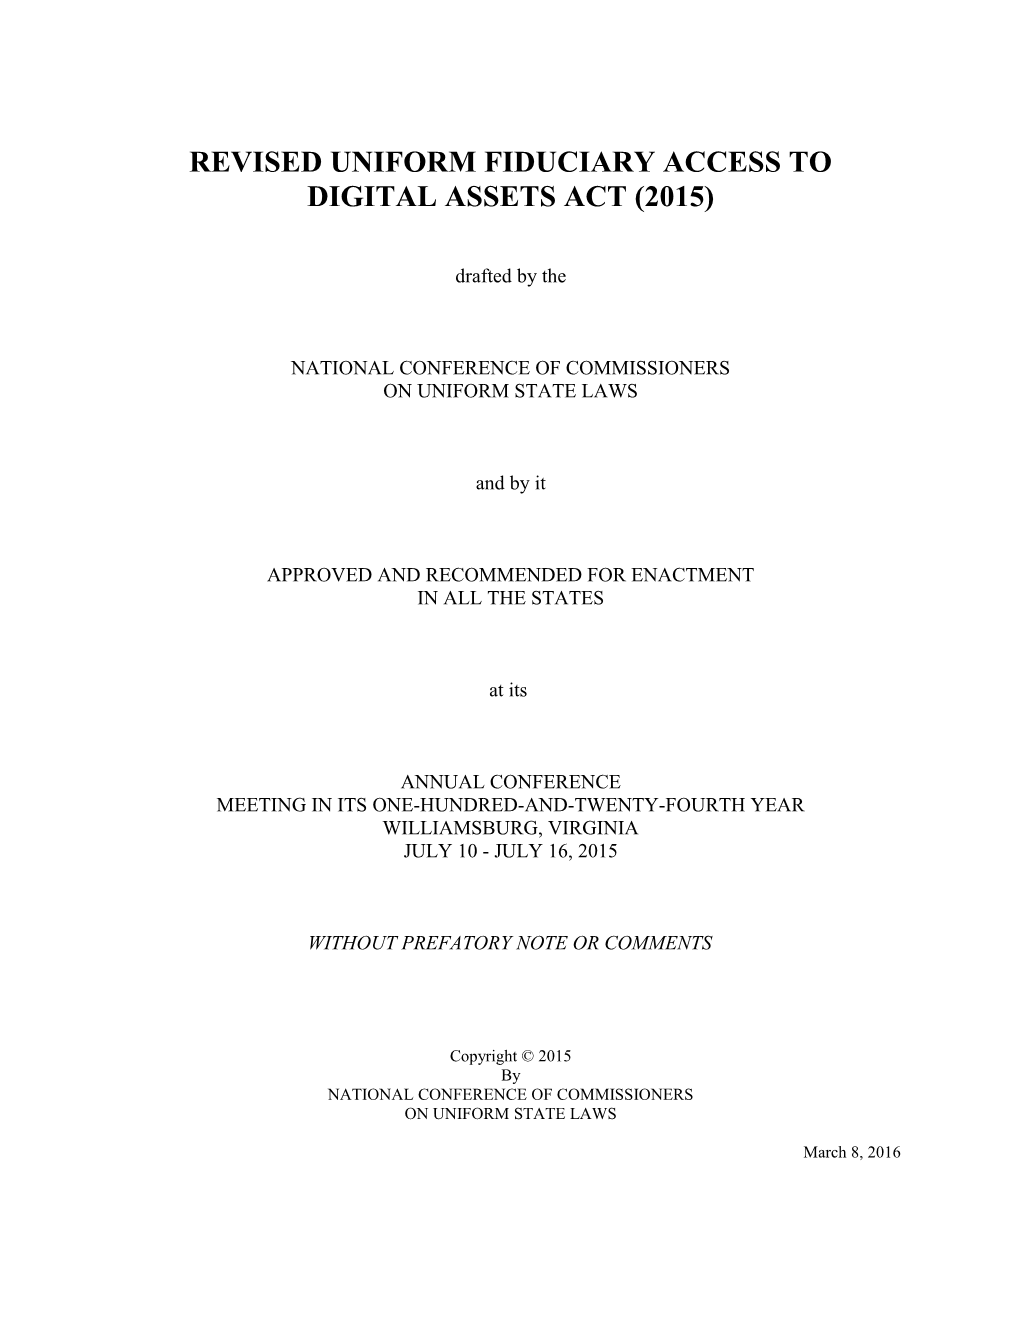 Revised Uniform Fiduciary Access to Digital Assets Act (2015)